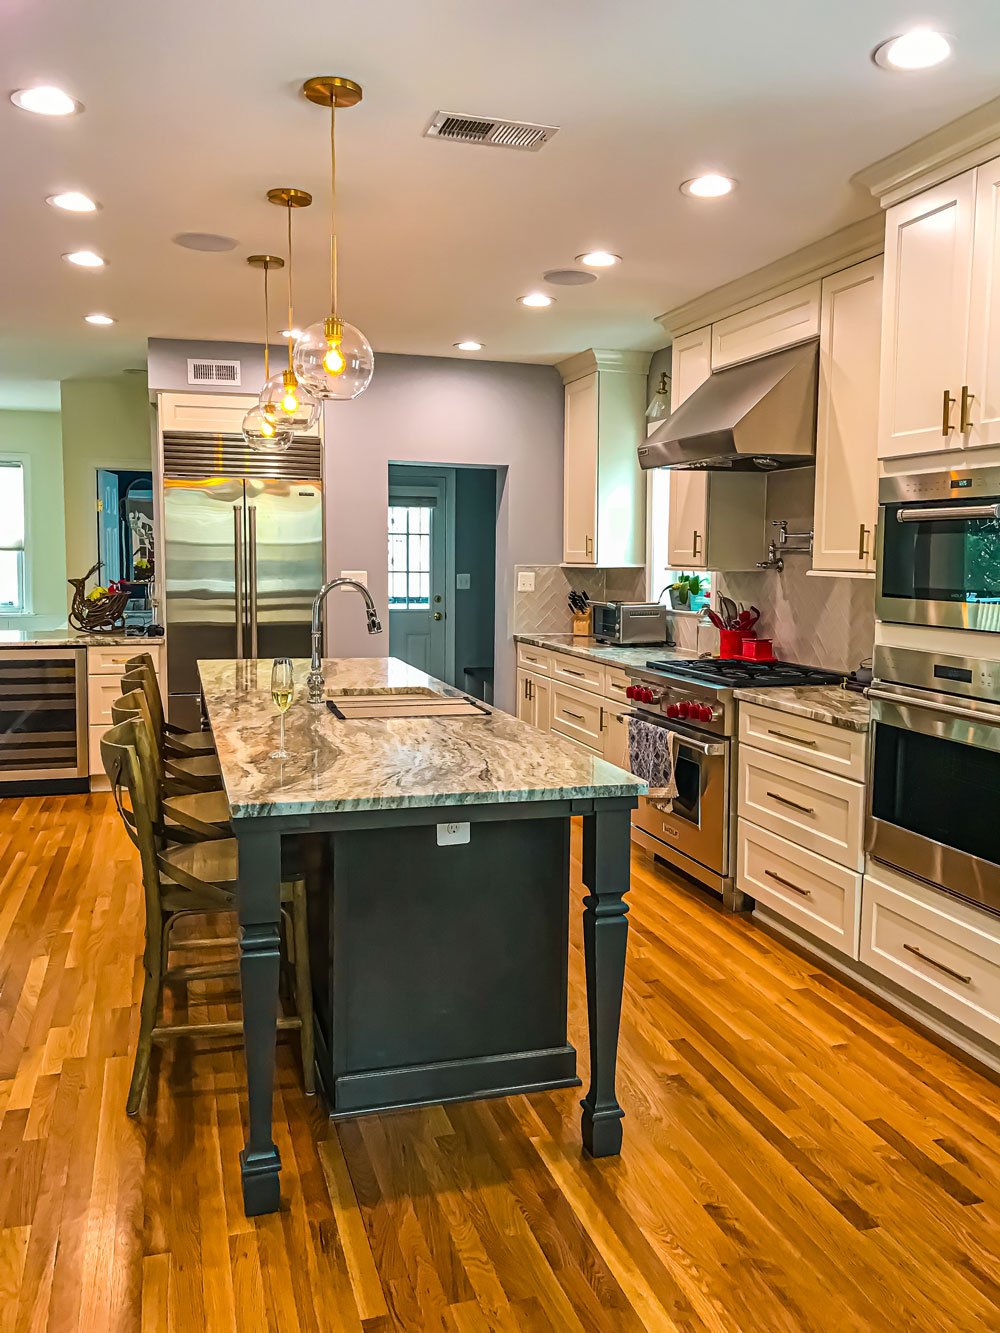 Remodeled kitchen with eight ceiling can lights and gold hanging lights above a kitchen island